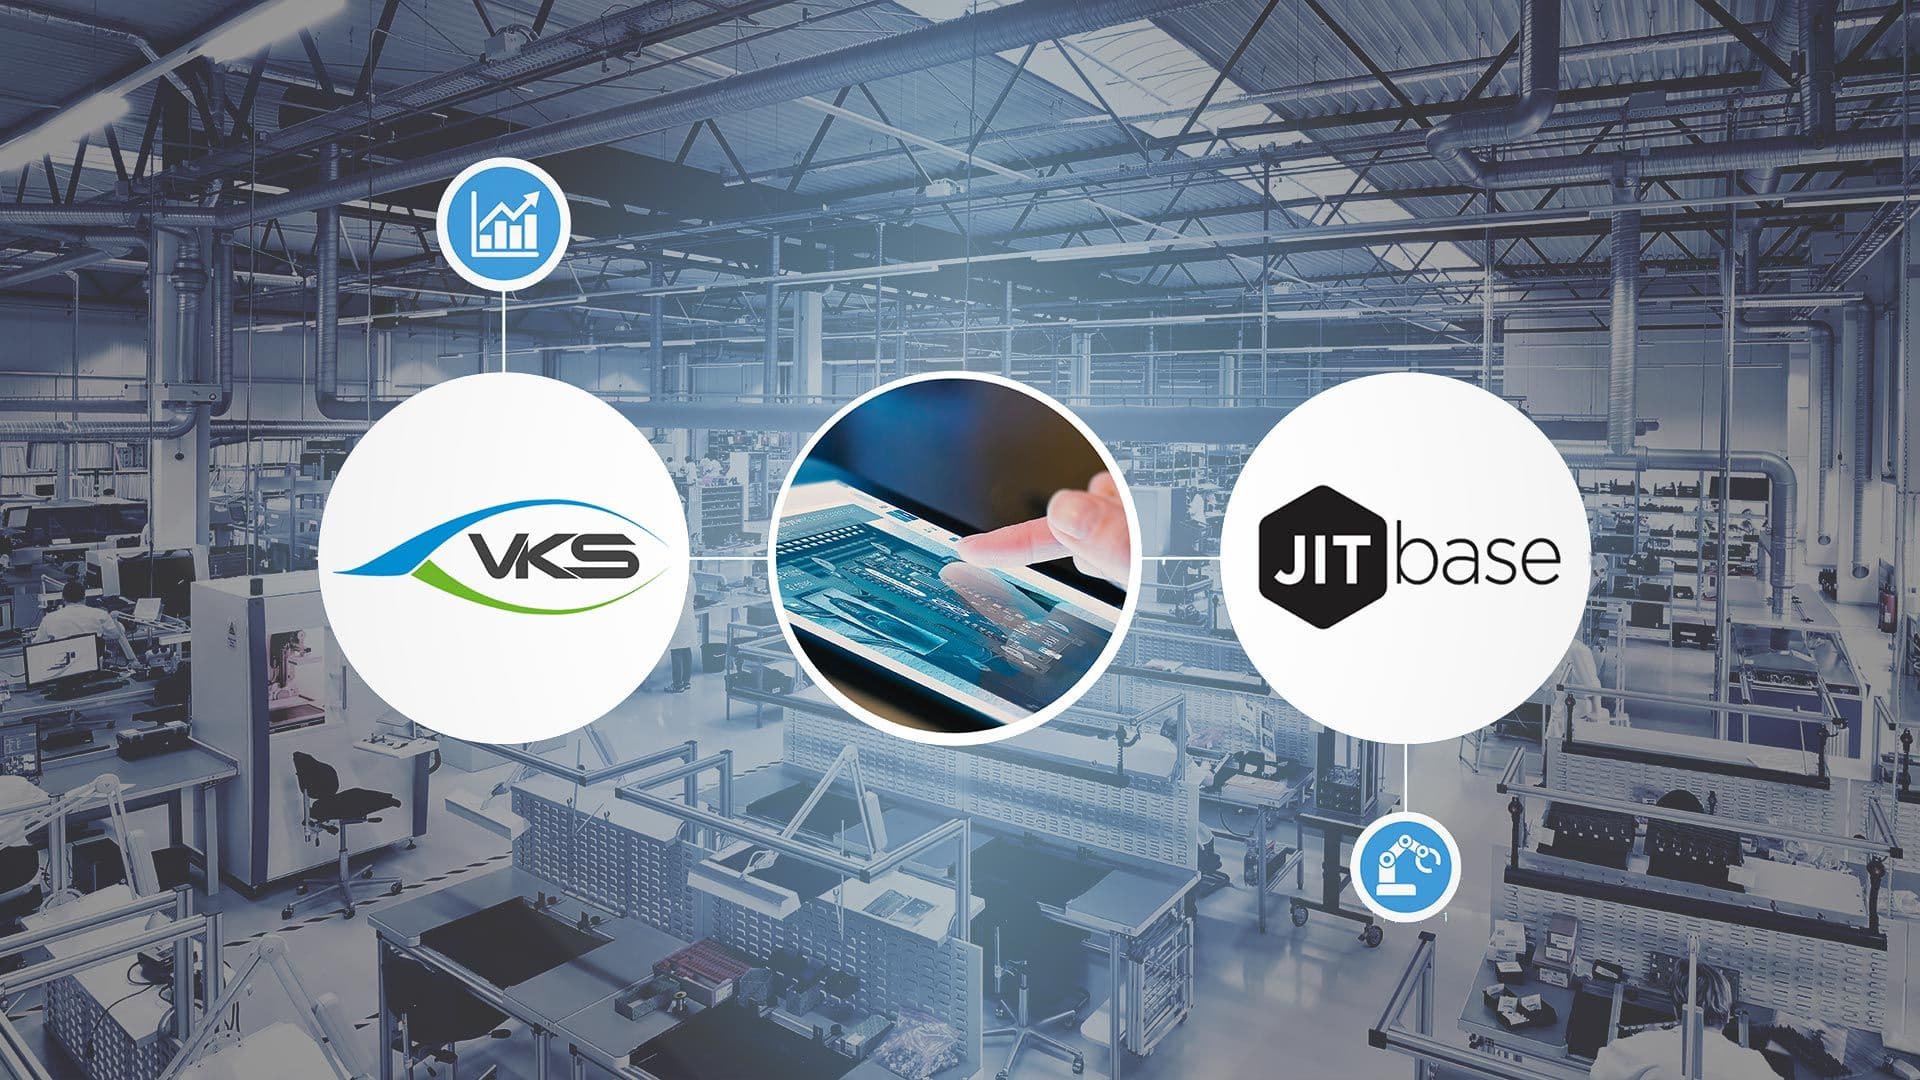 Graphic of VKS logo and Jitbase overlayed on a factory background